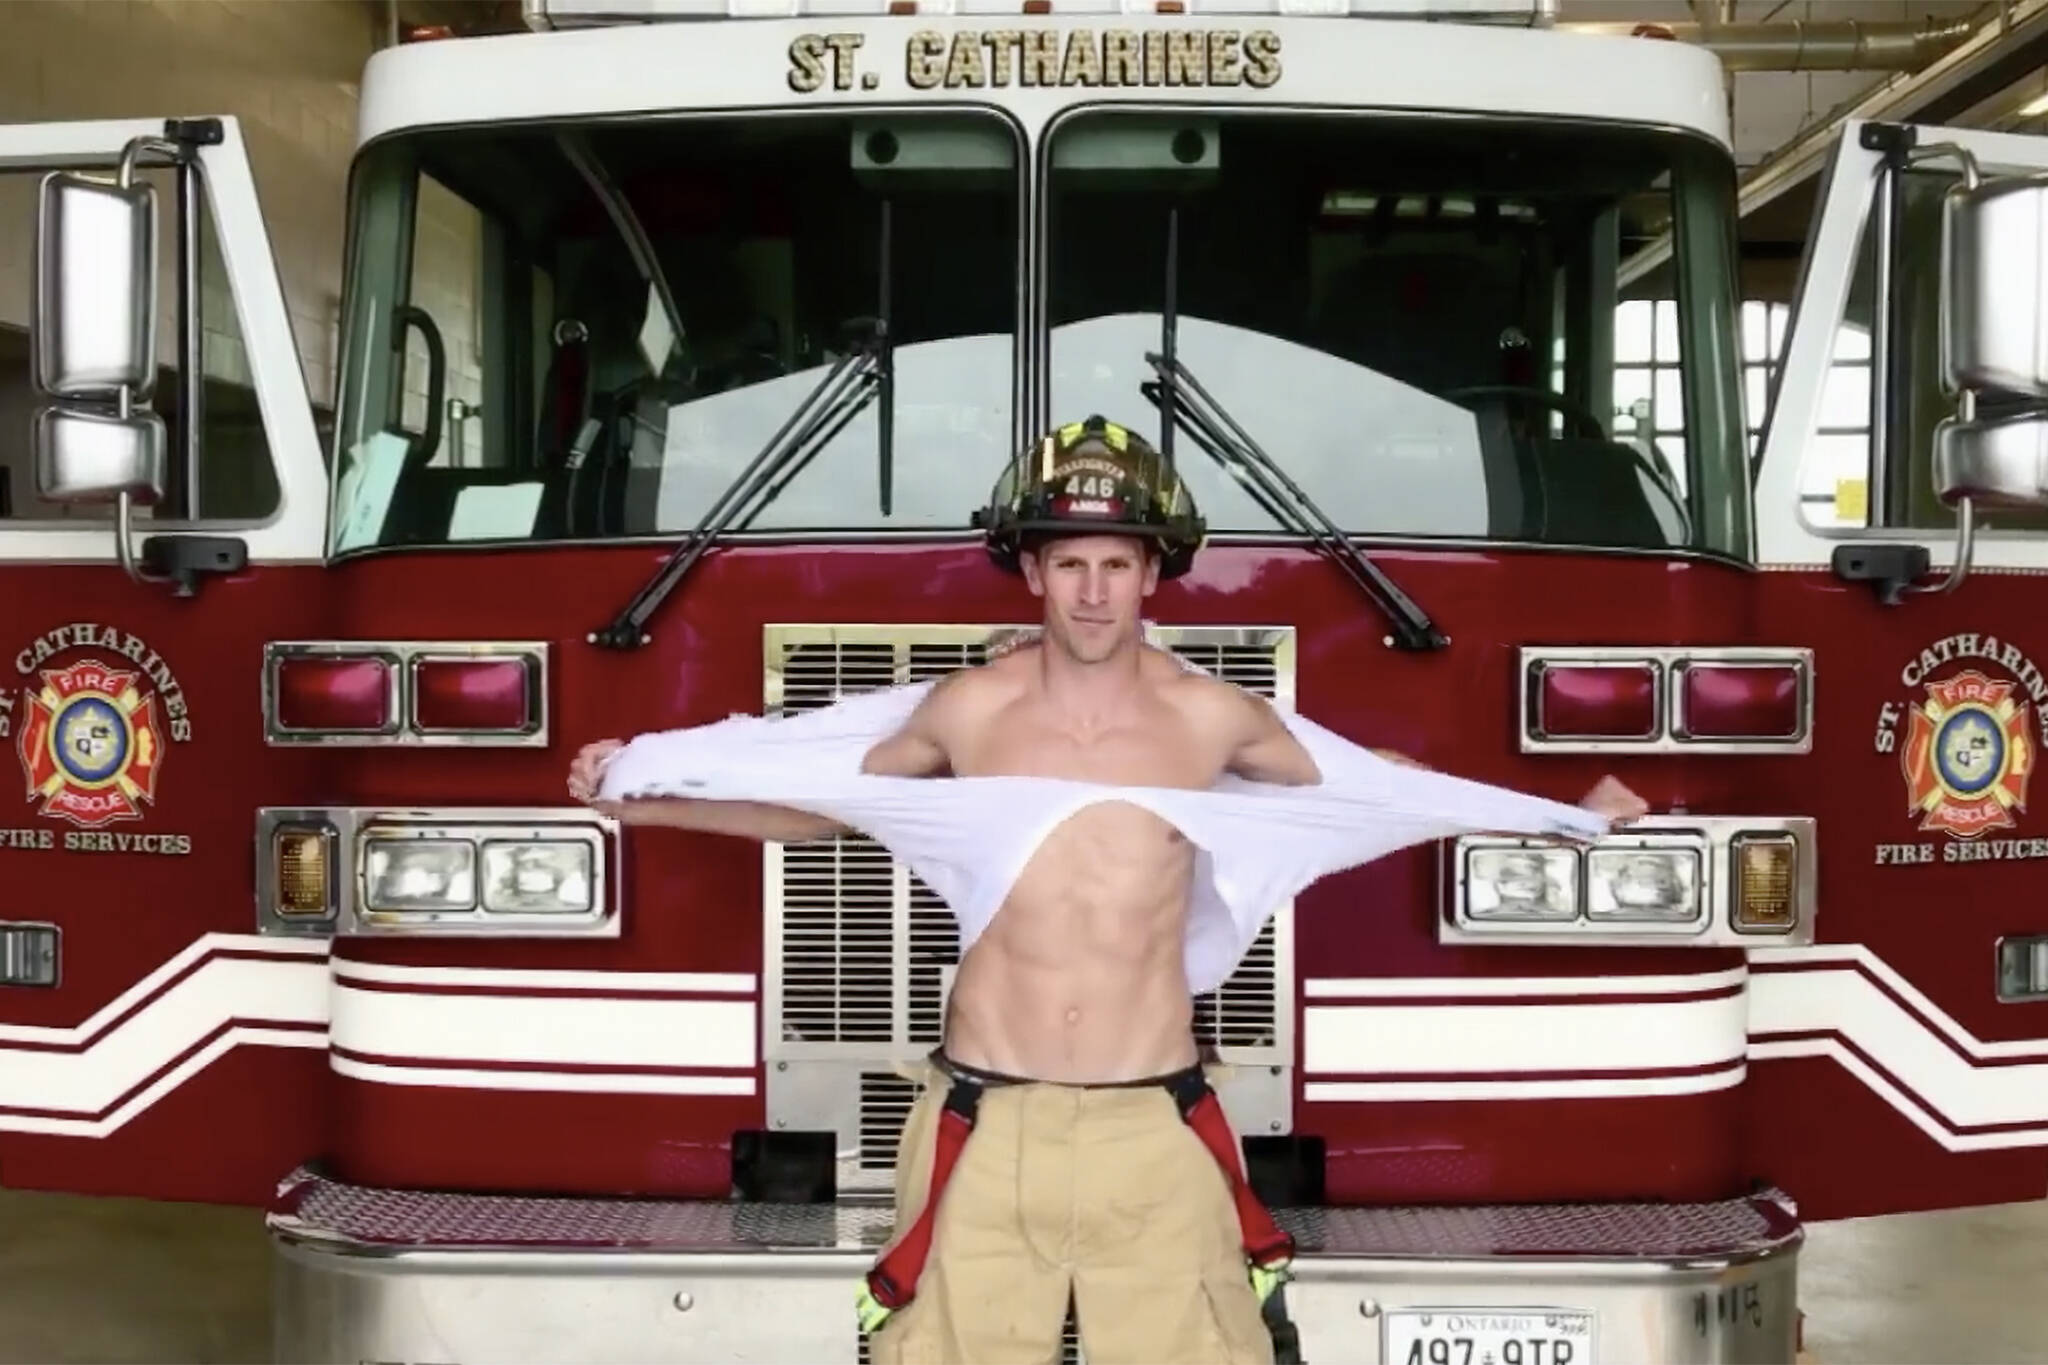 City officials say local firefighter calendar is too hot to sell